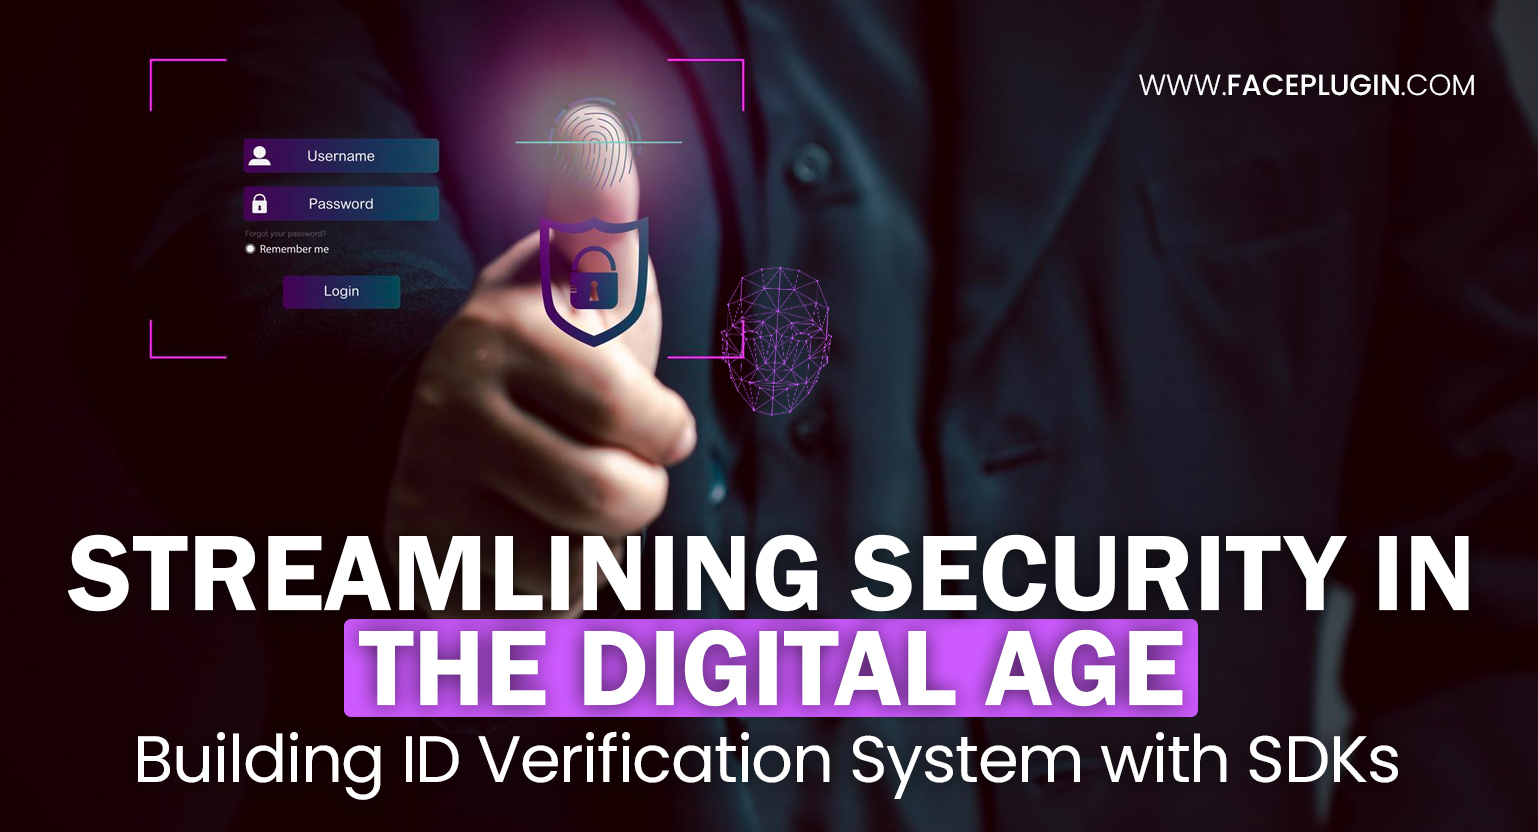 Streamlining Security in the Digital Age—Building ID Verification System with SDKs